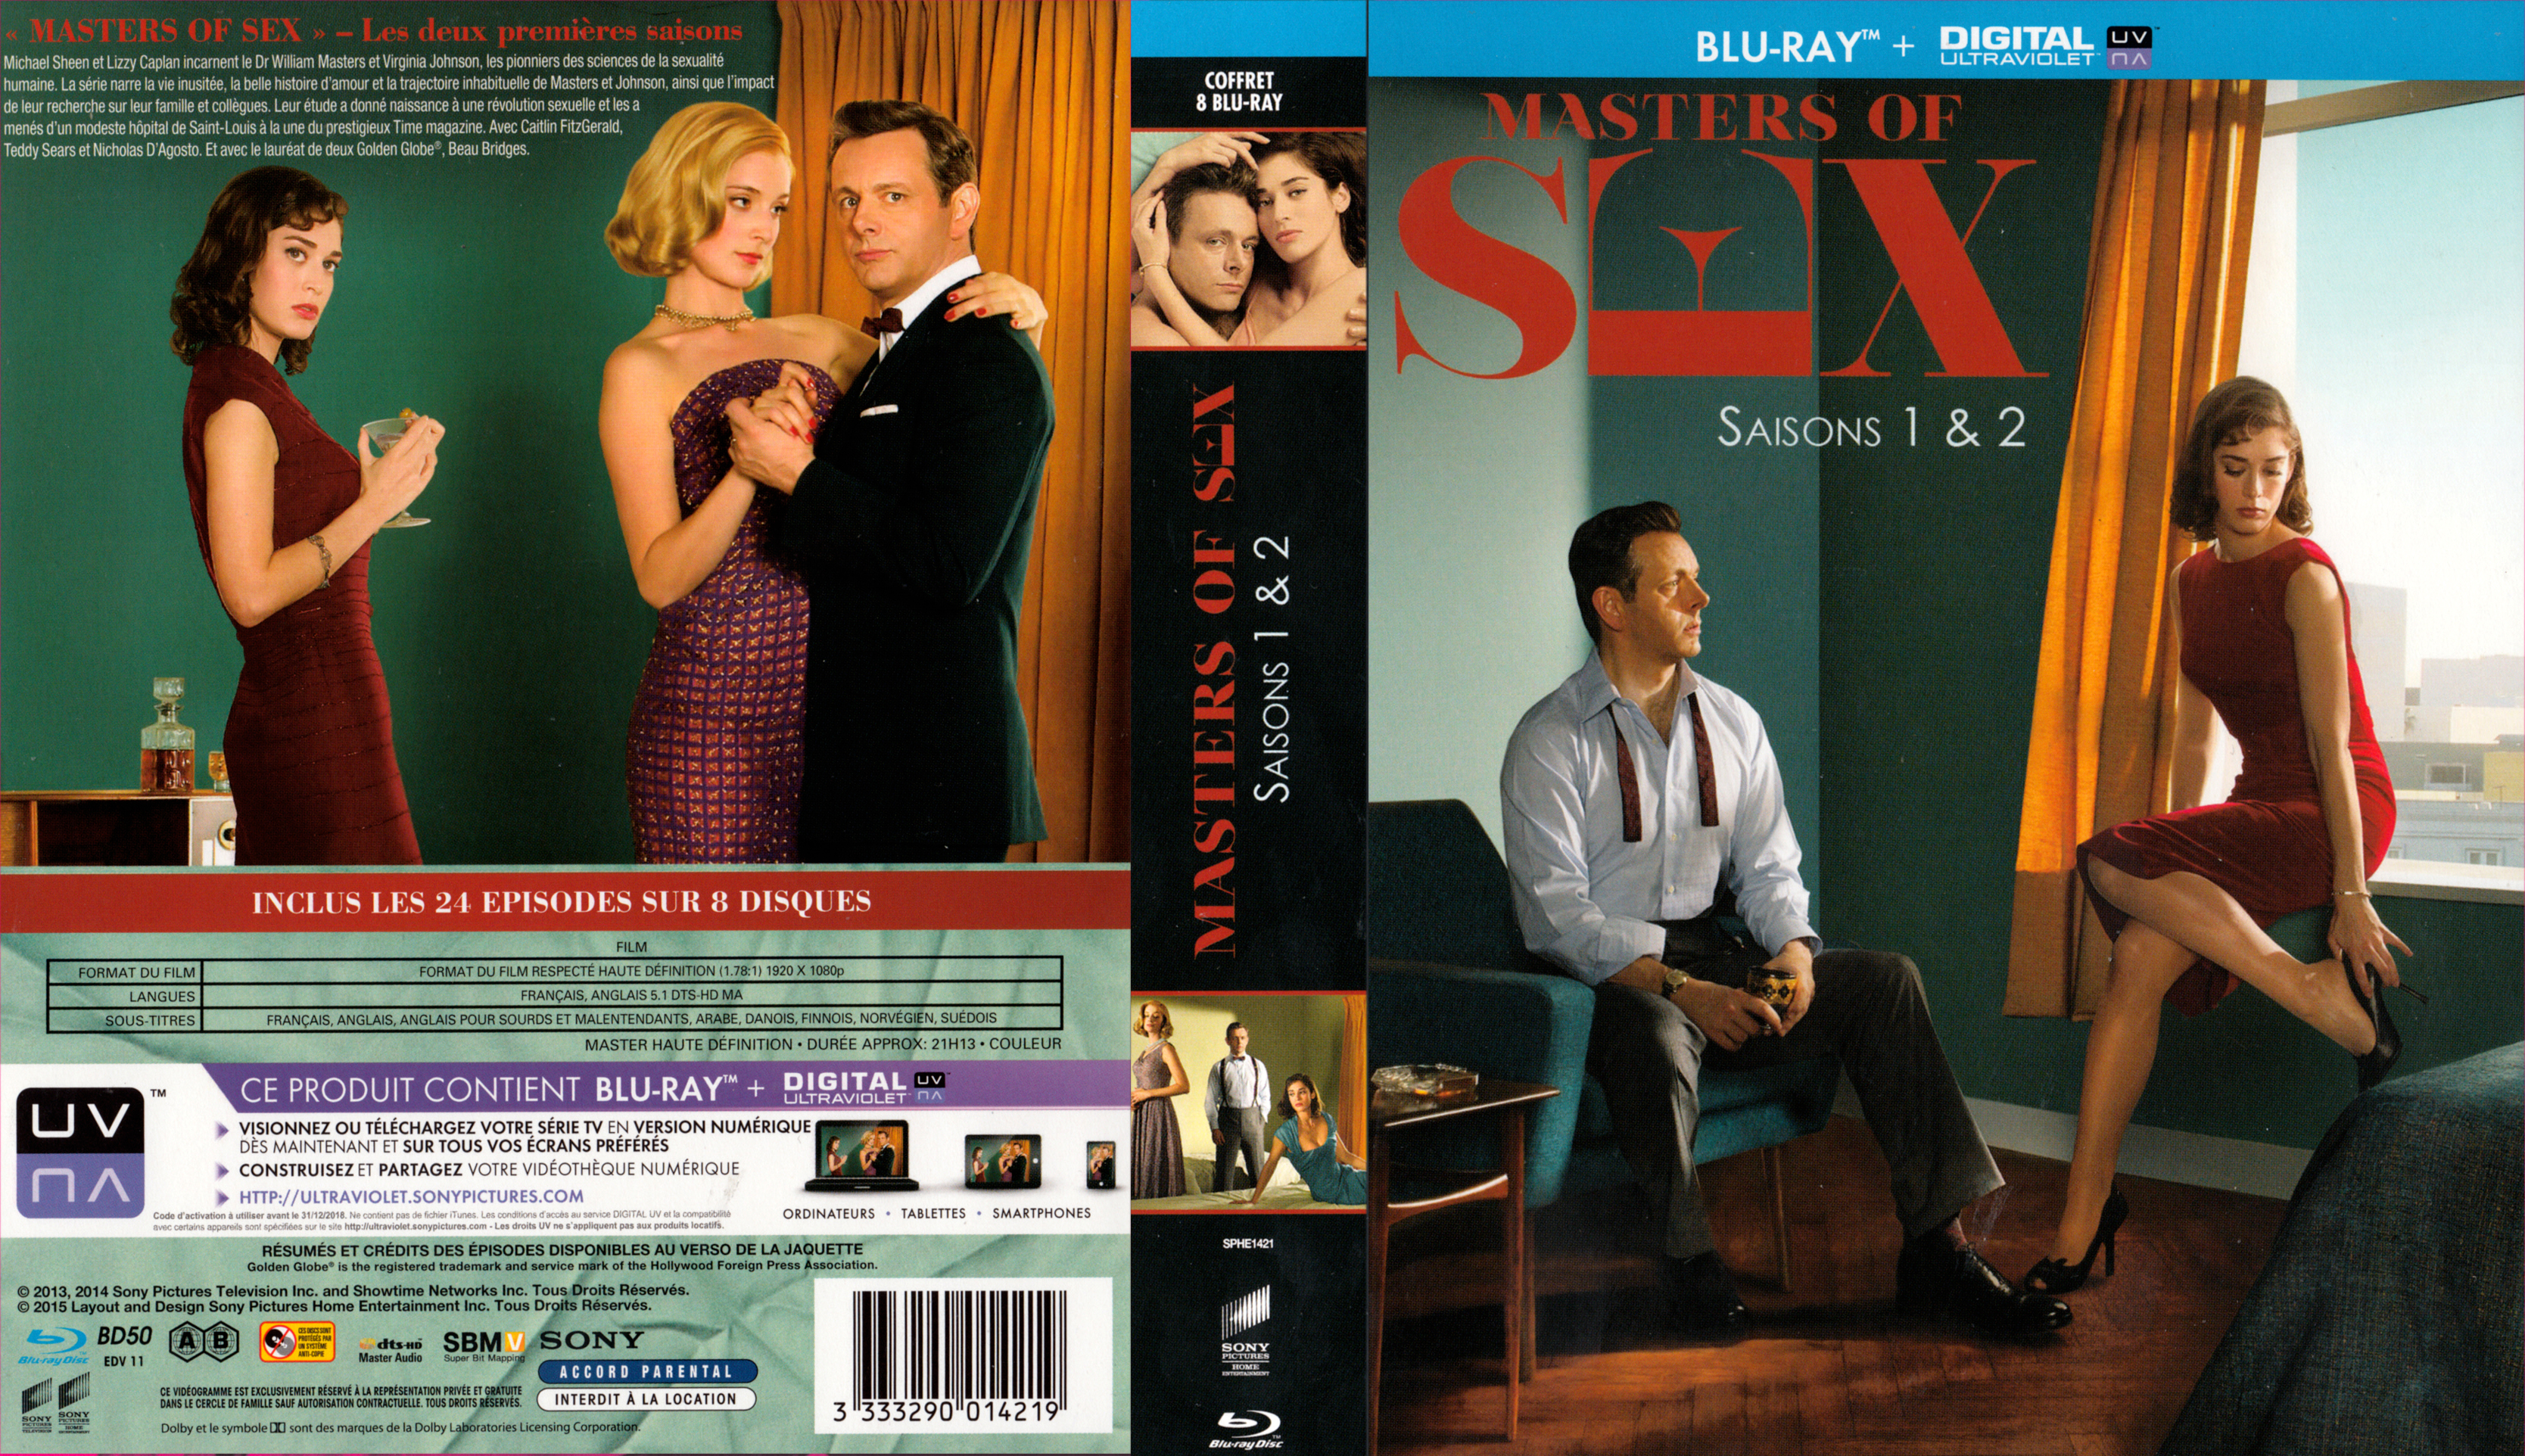 Jaquette DVD Masters of sex Saison 1-2 (BLU-RAY)